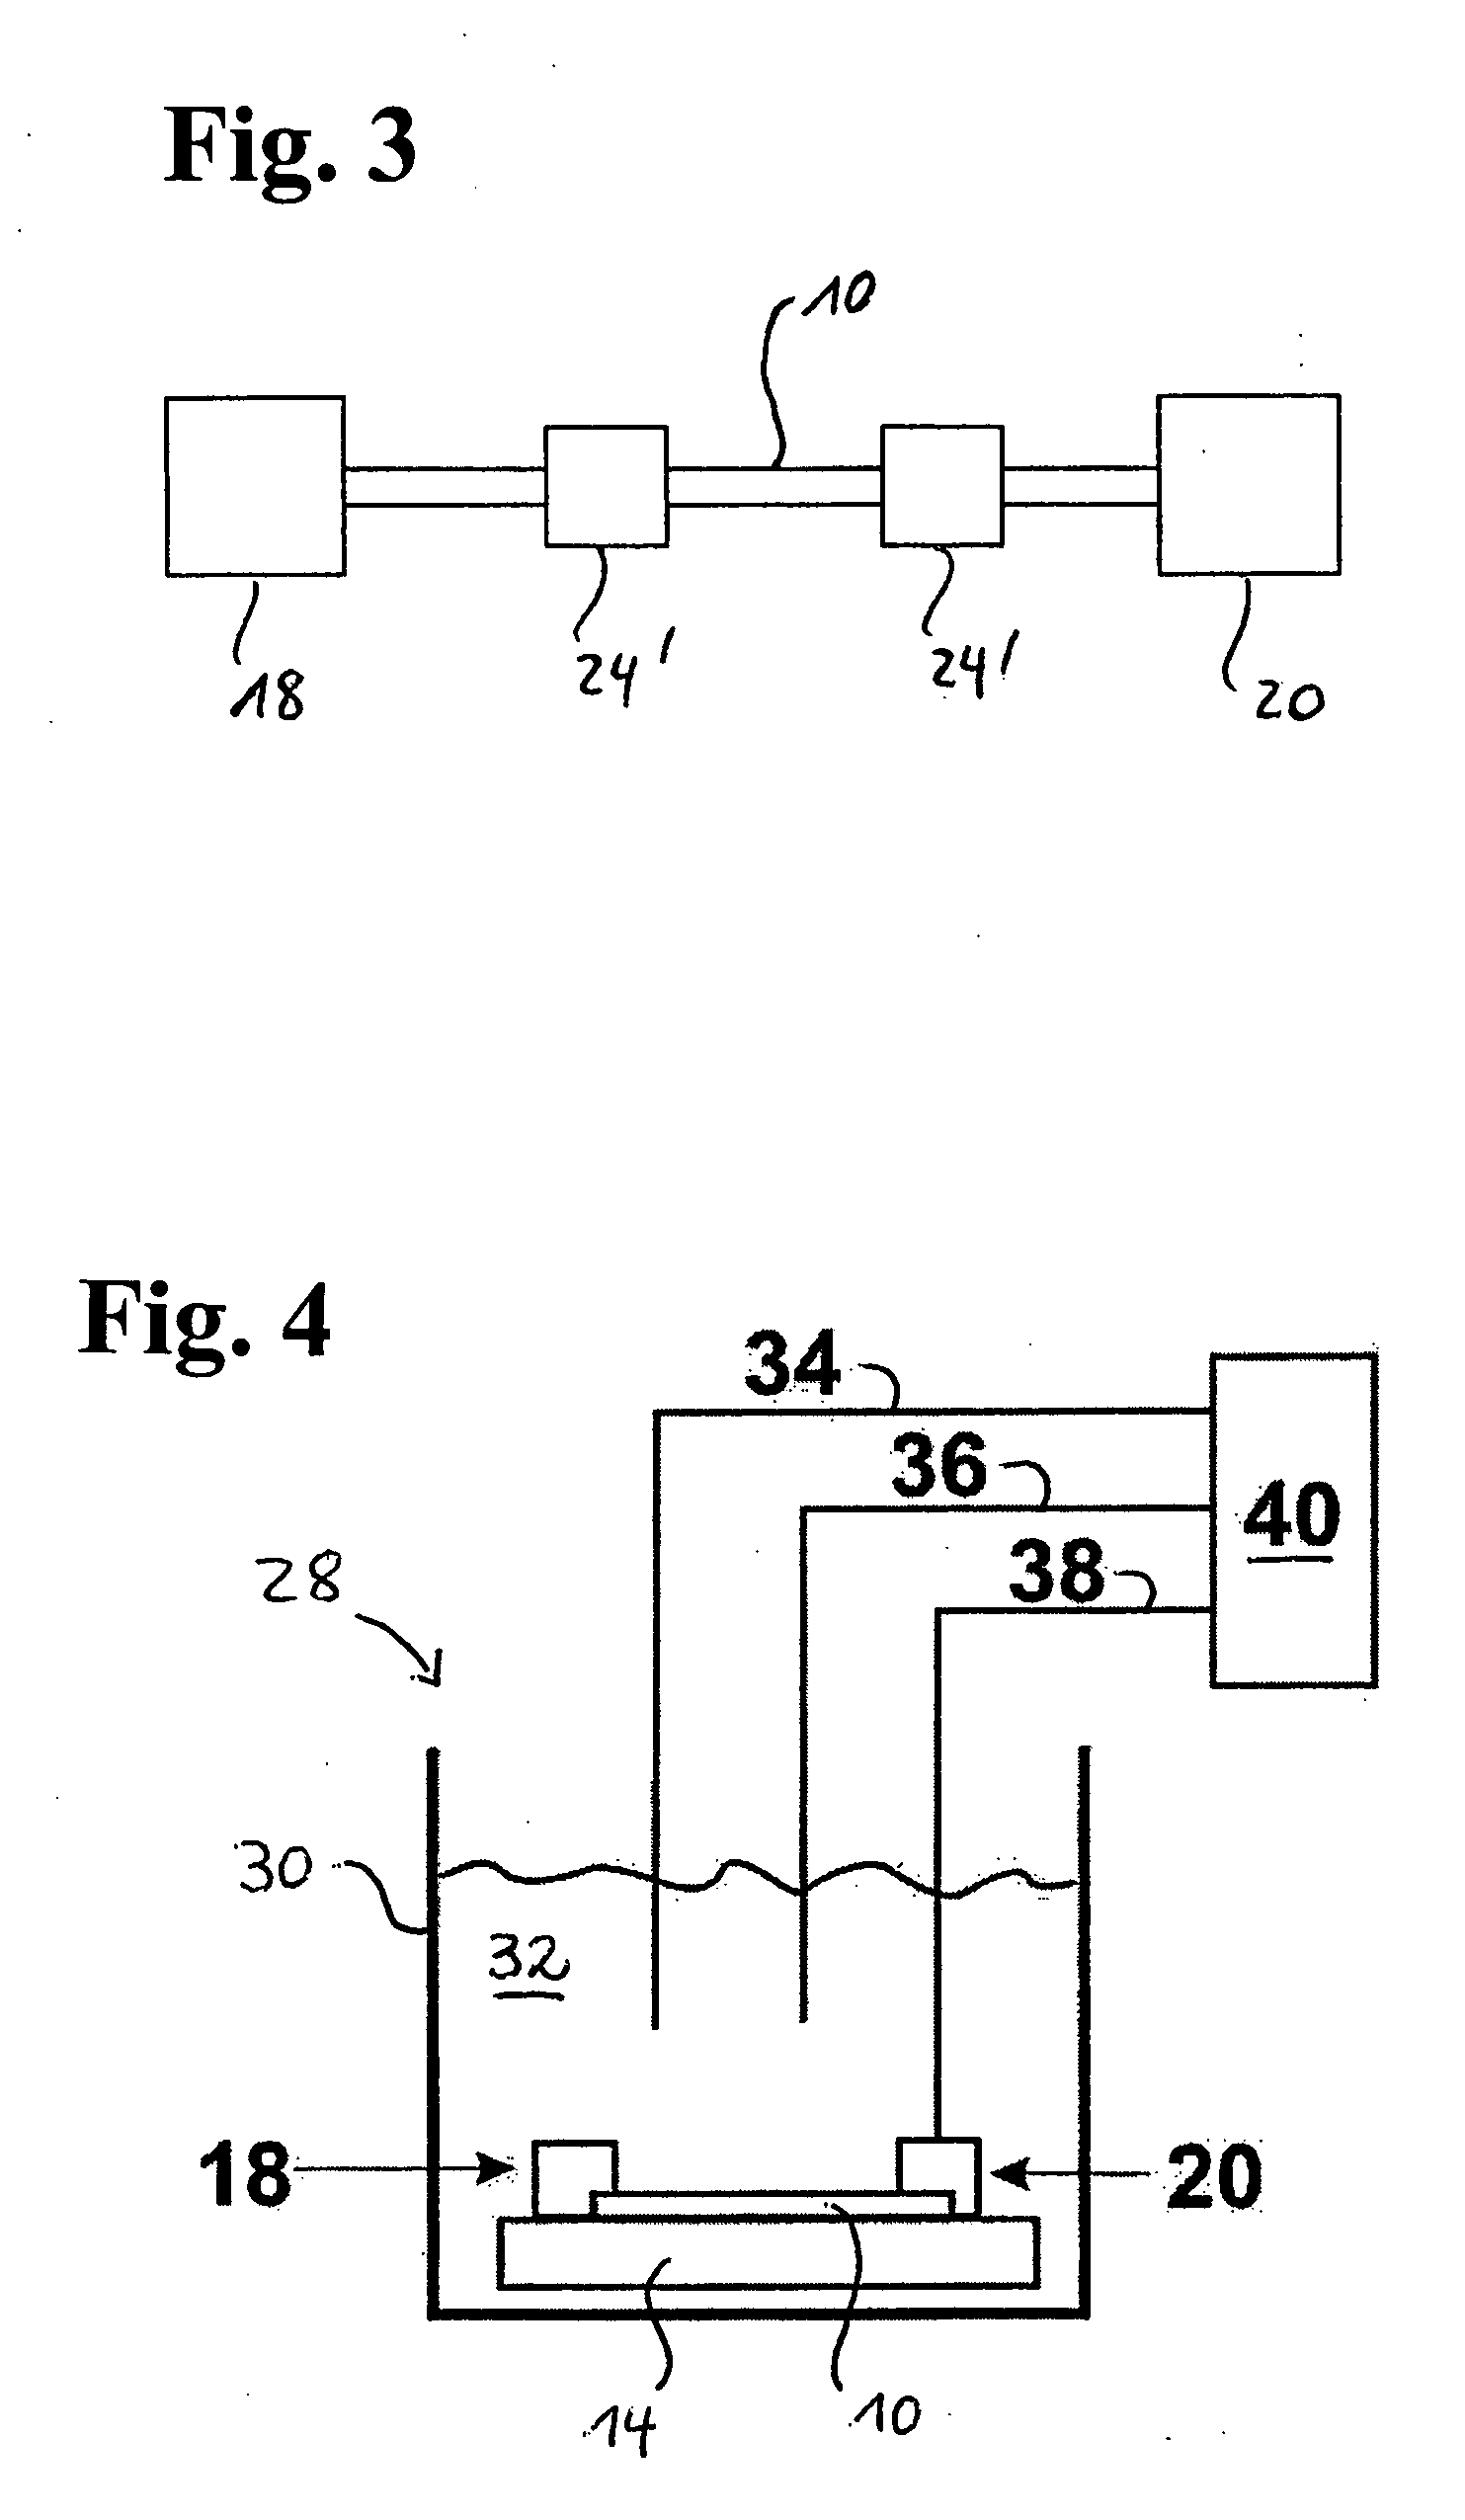 Method of fabricating carbon nanotube field-effect transistors through controlled electrochemical modification